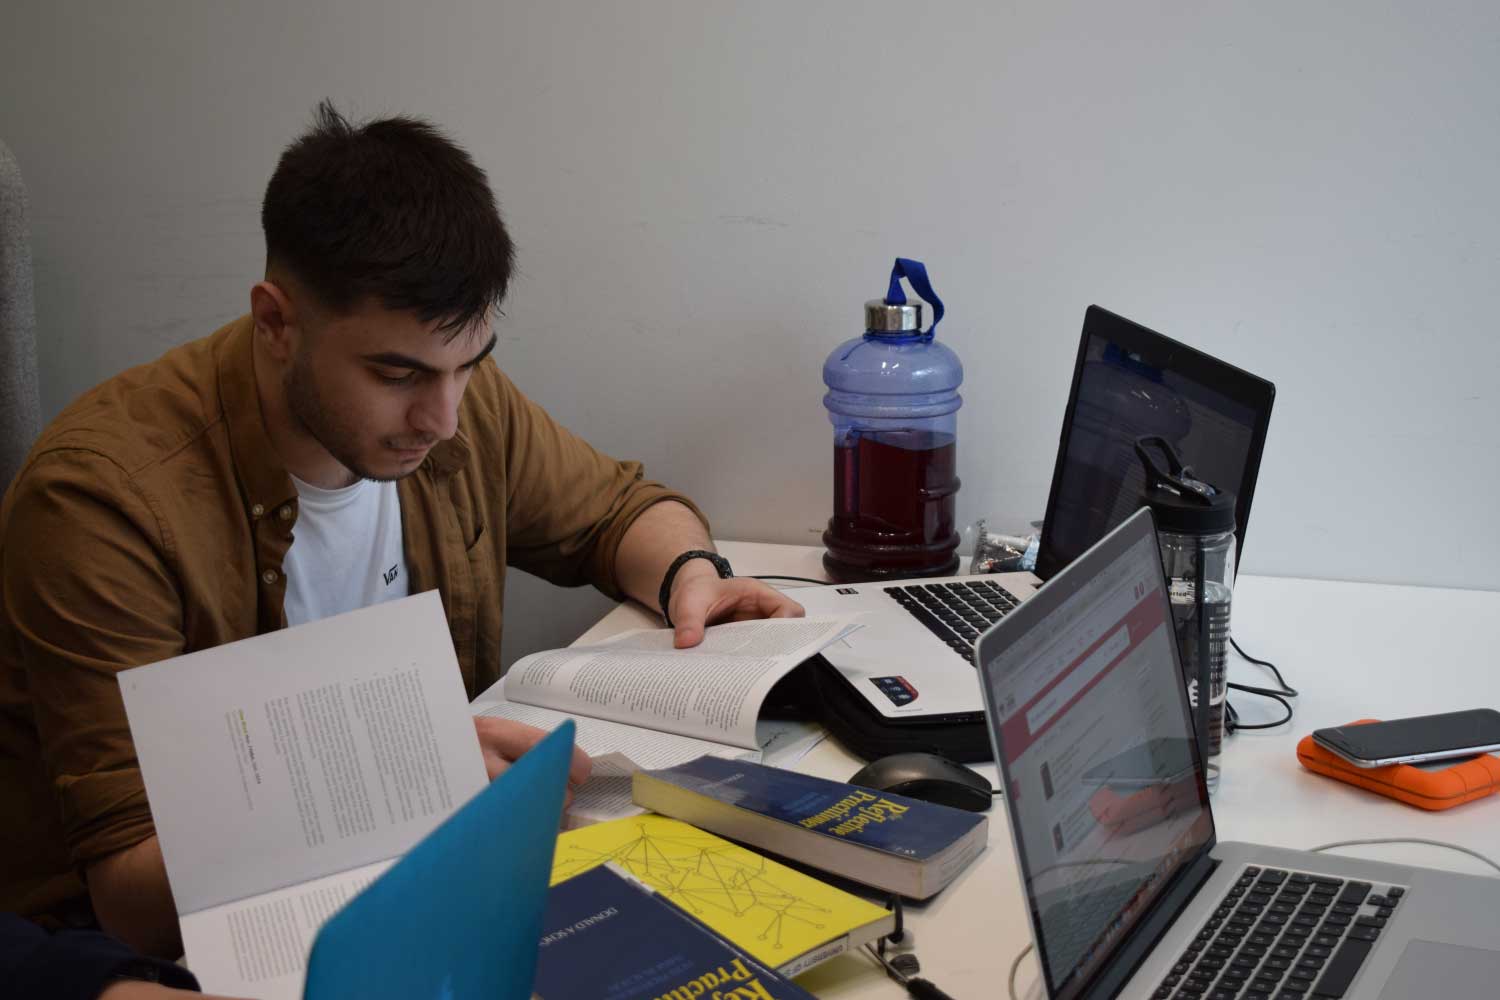 Student studying with a laptop and several books